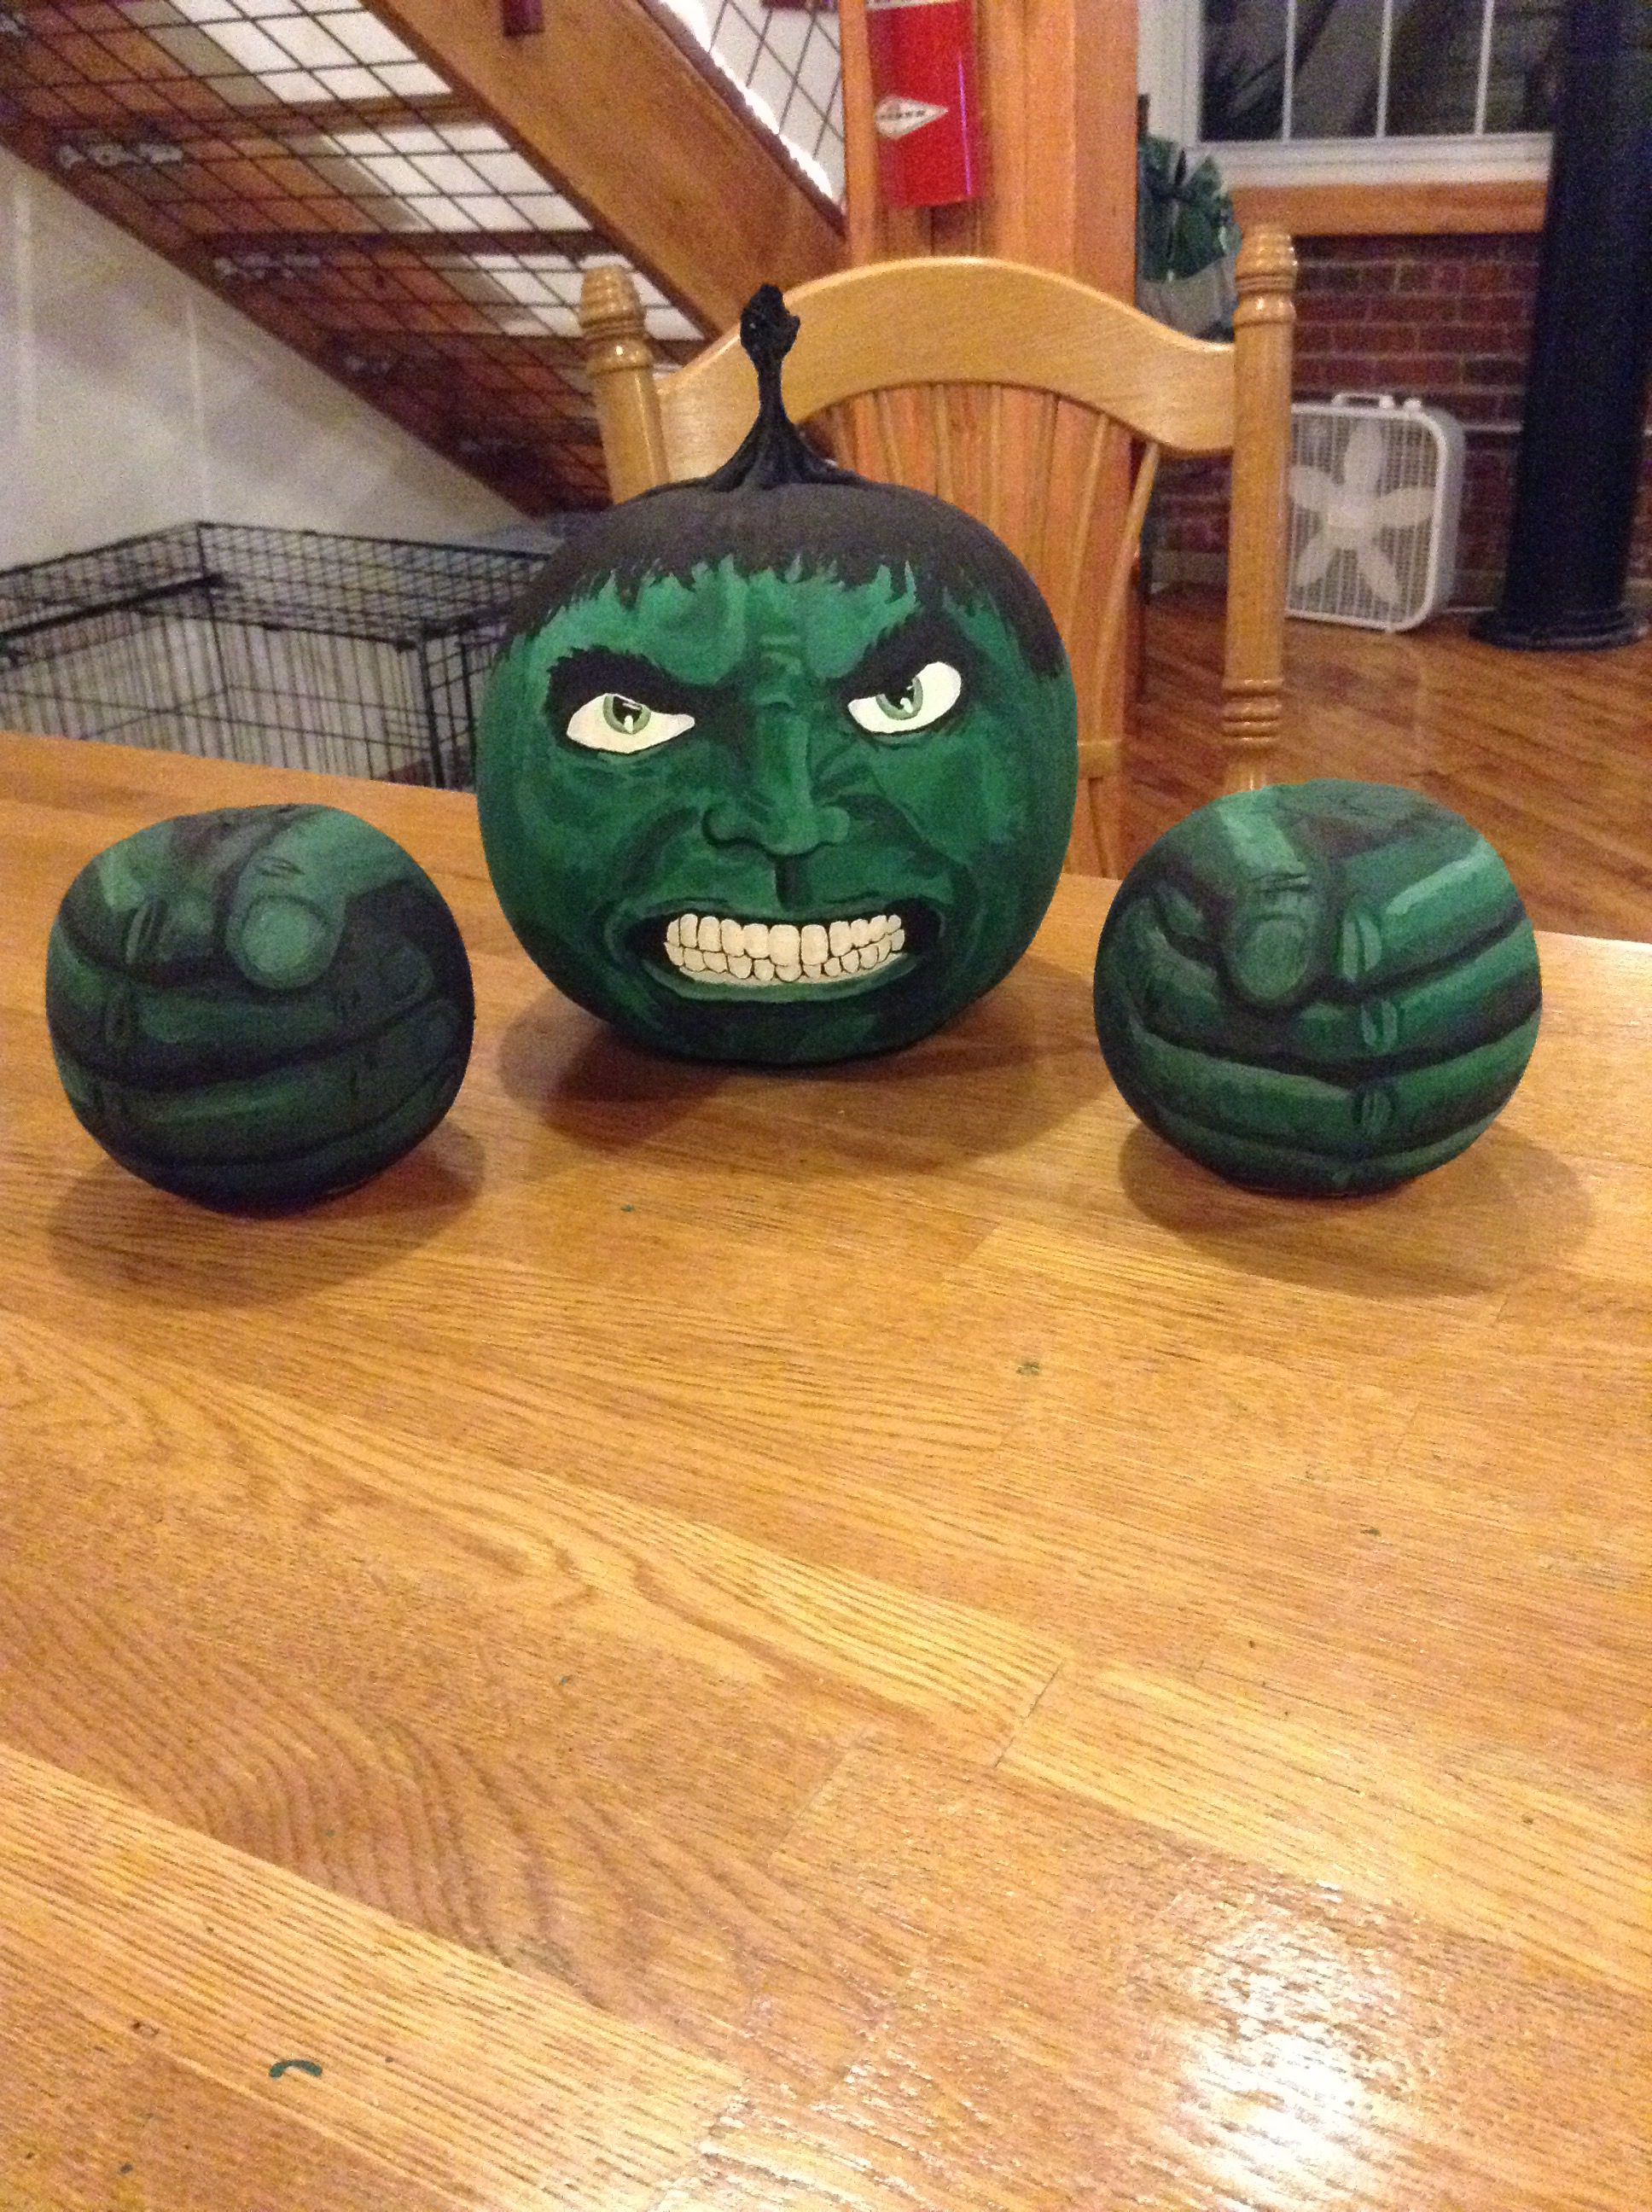 Painted Hulk pumpkins for those who feel angry